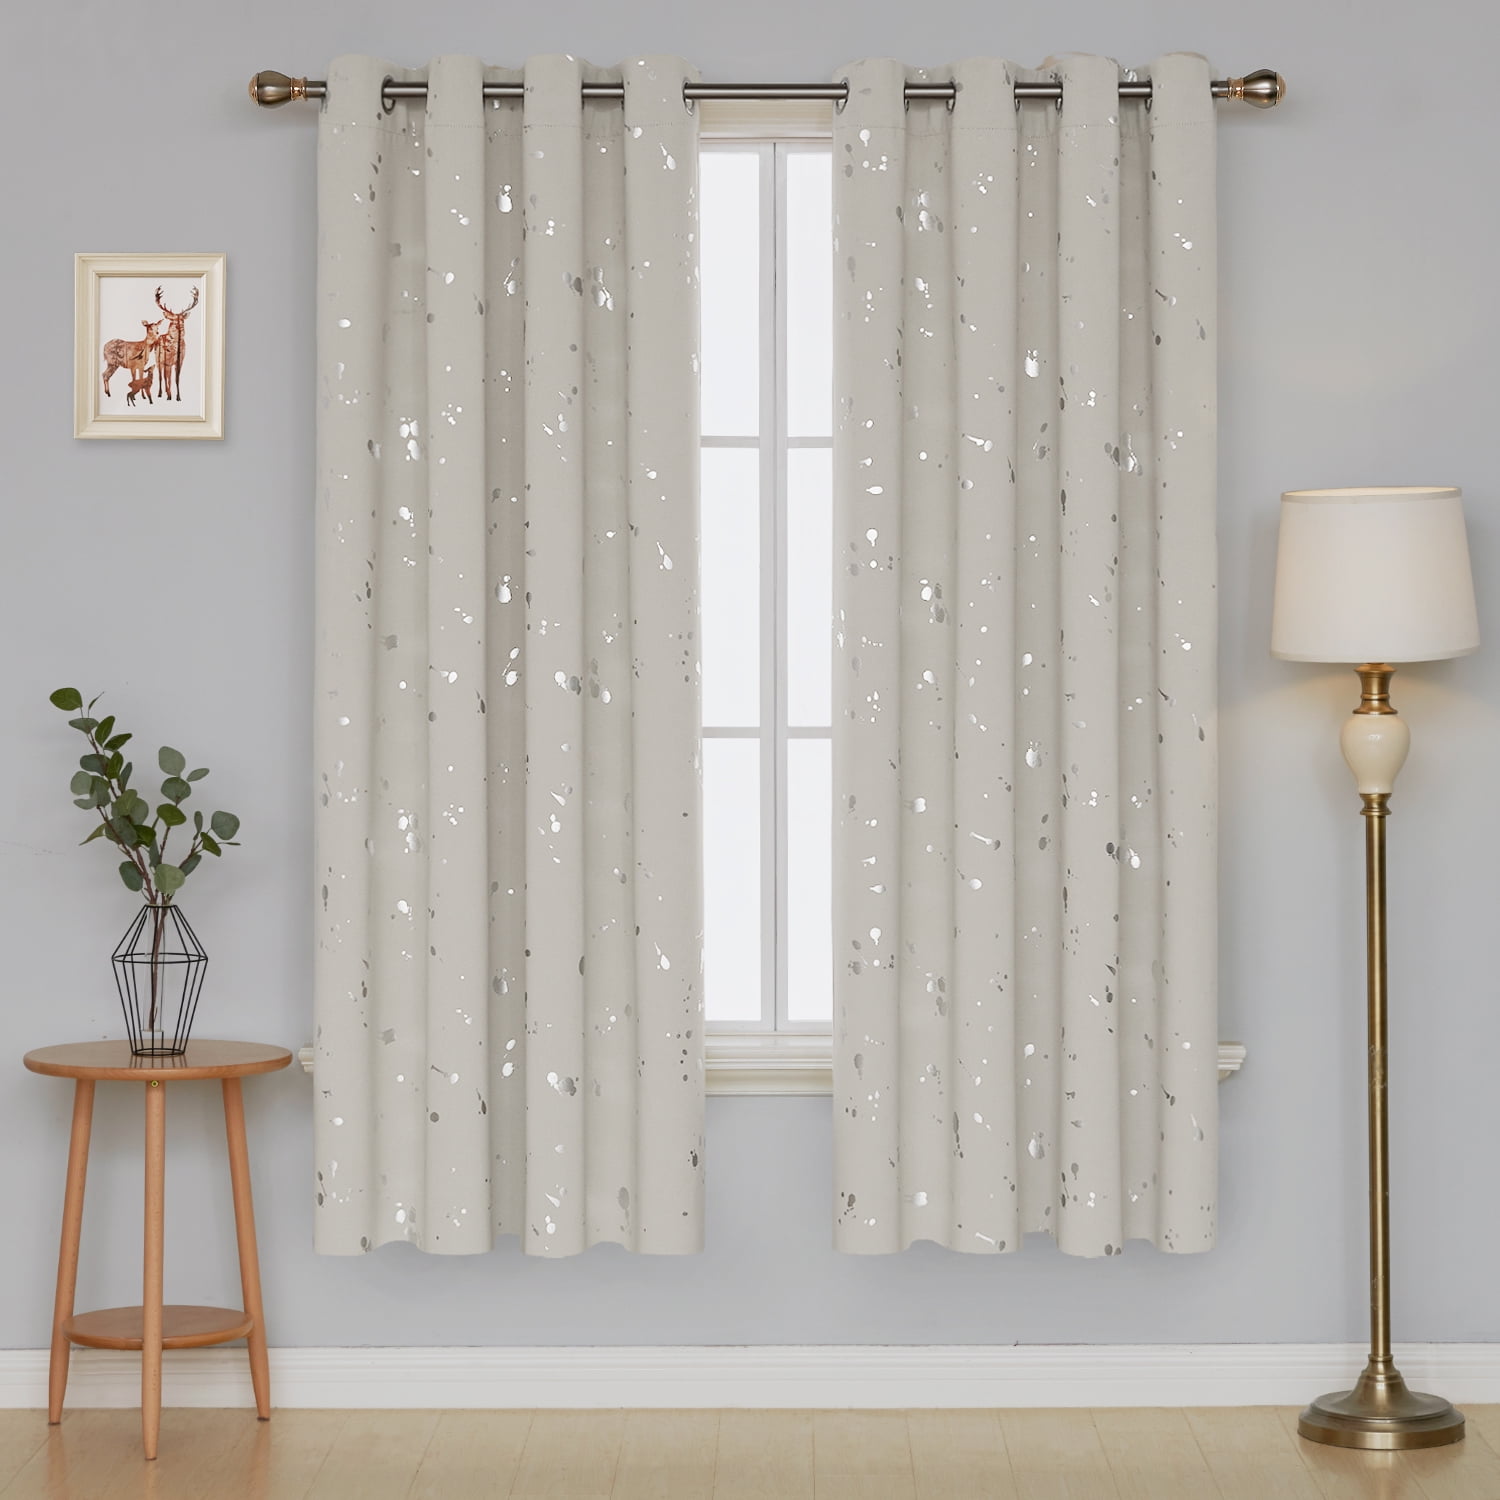 Deconovo Silver Dots Printed Blackout Curtains Grommet Curtains Room